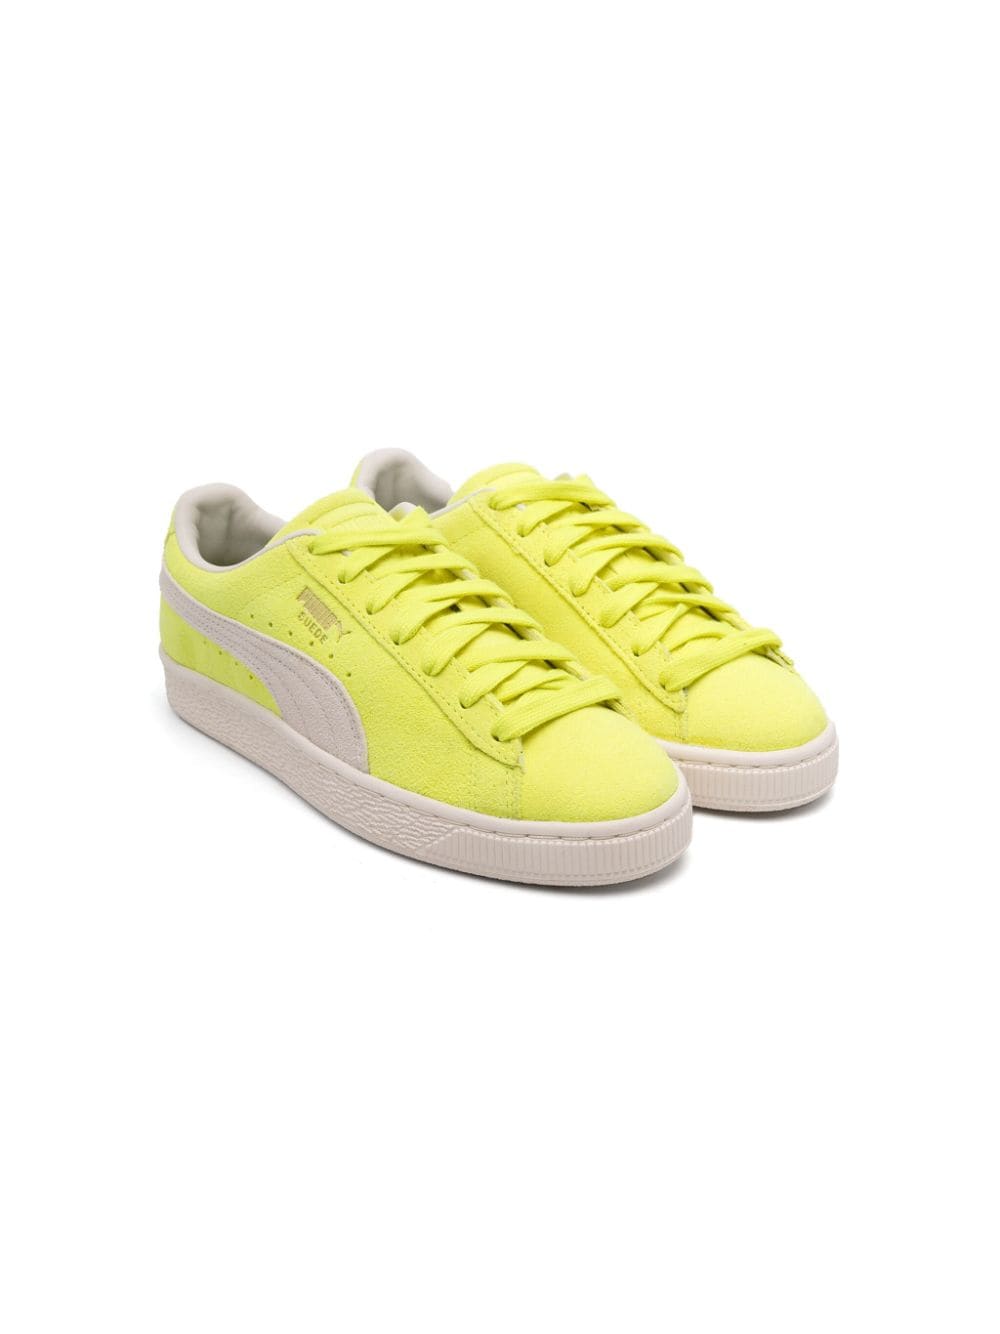 Puma Kids Formstrip suede sneakers Yellow